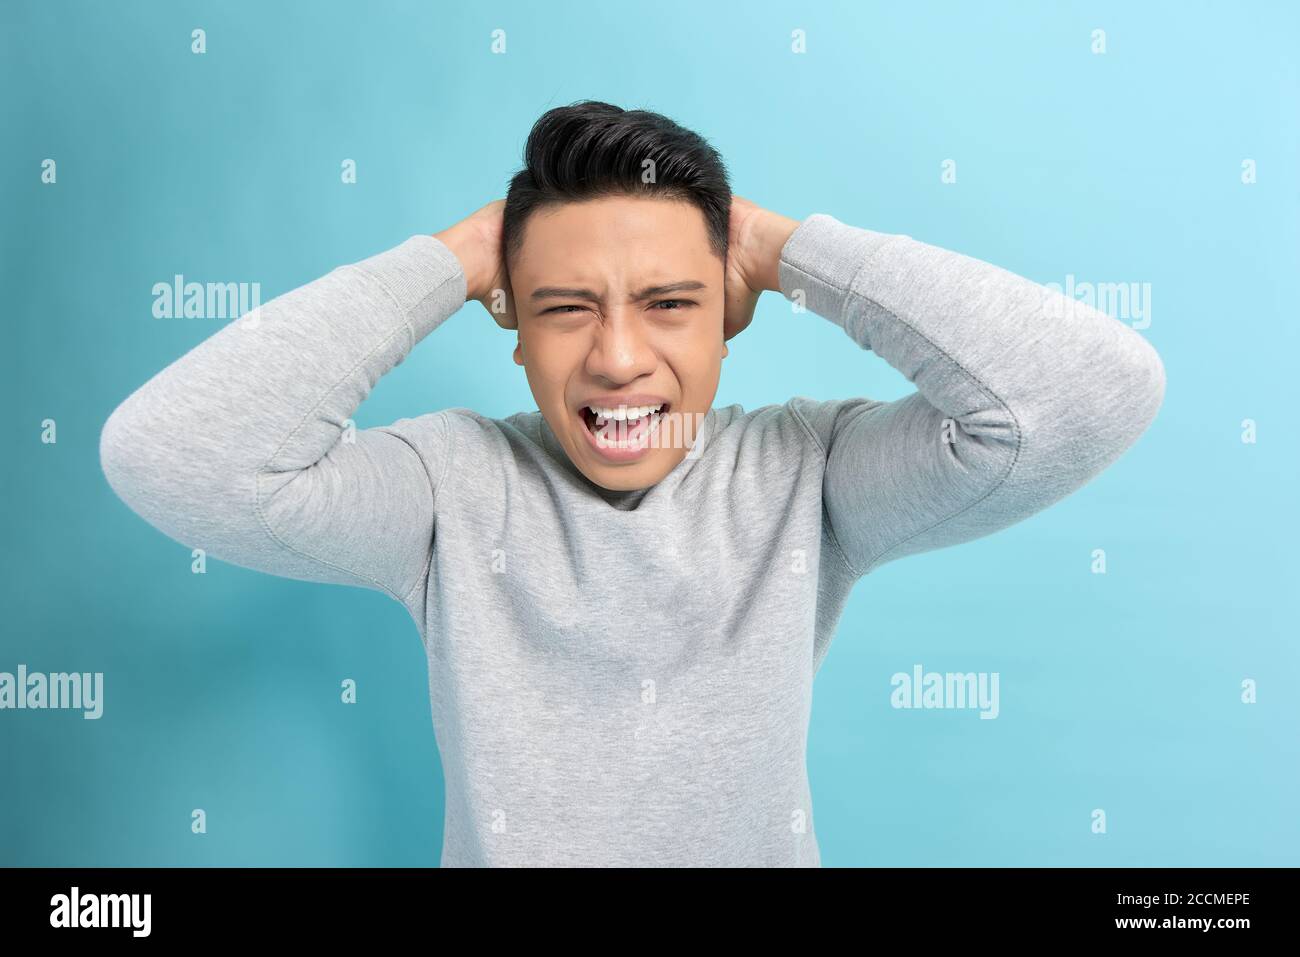 Emotional stress. Frustrated young man holding hands on ears while standing against blue background Stock Photo